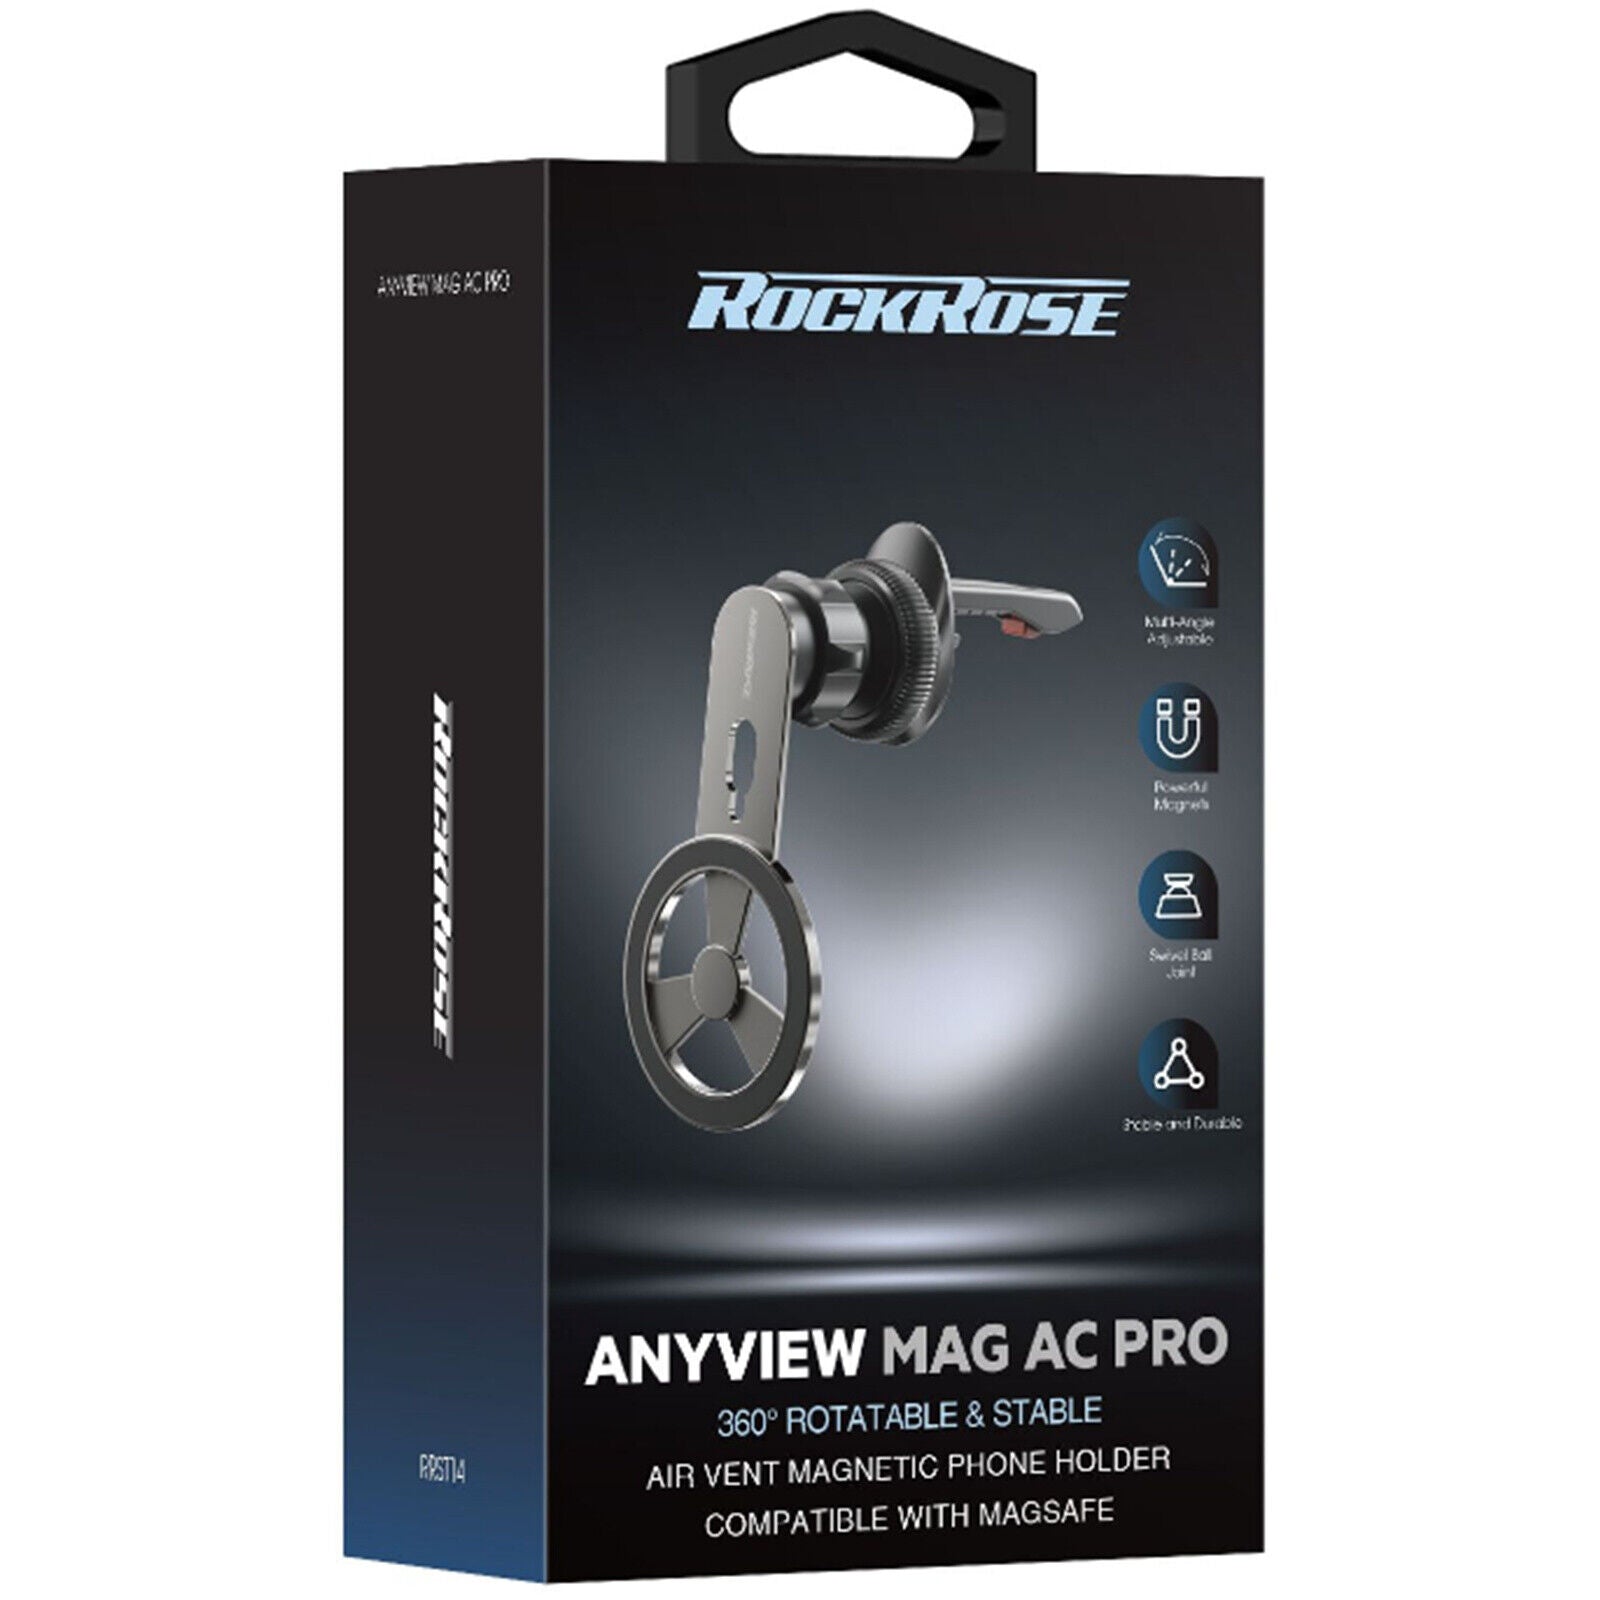 RockRose Anyview Mag AC Pro 360° Air Vent Magnetic Car Mount